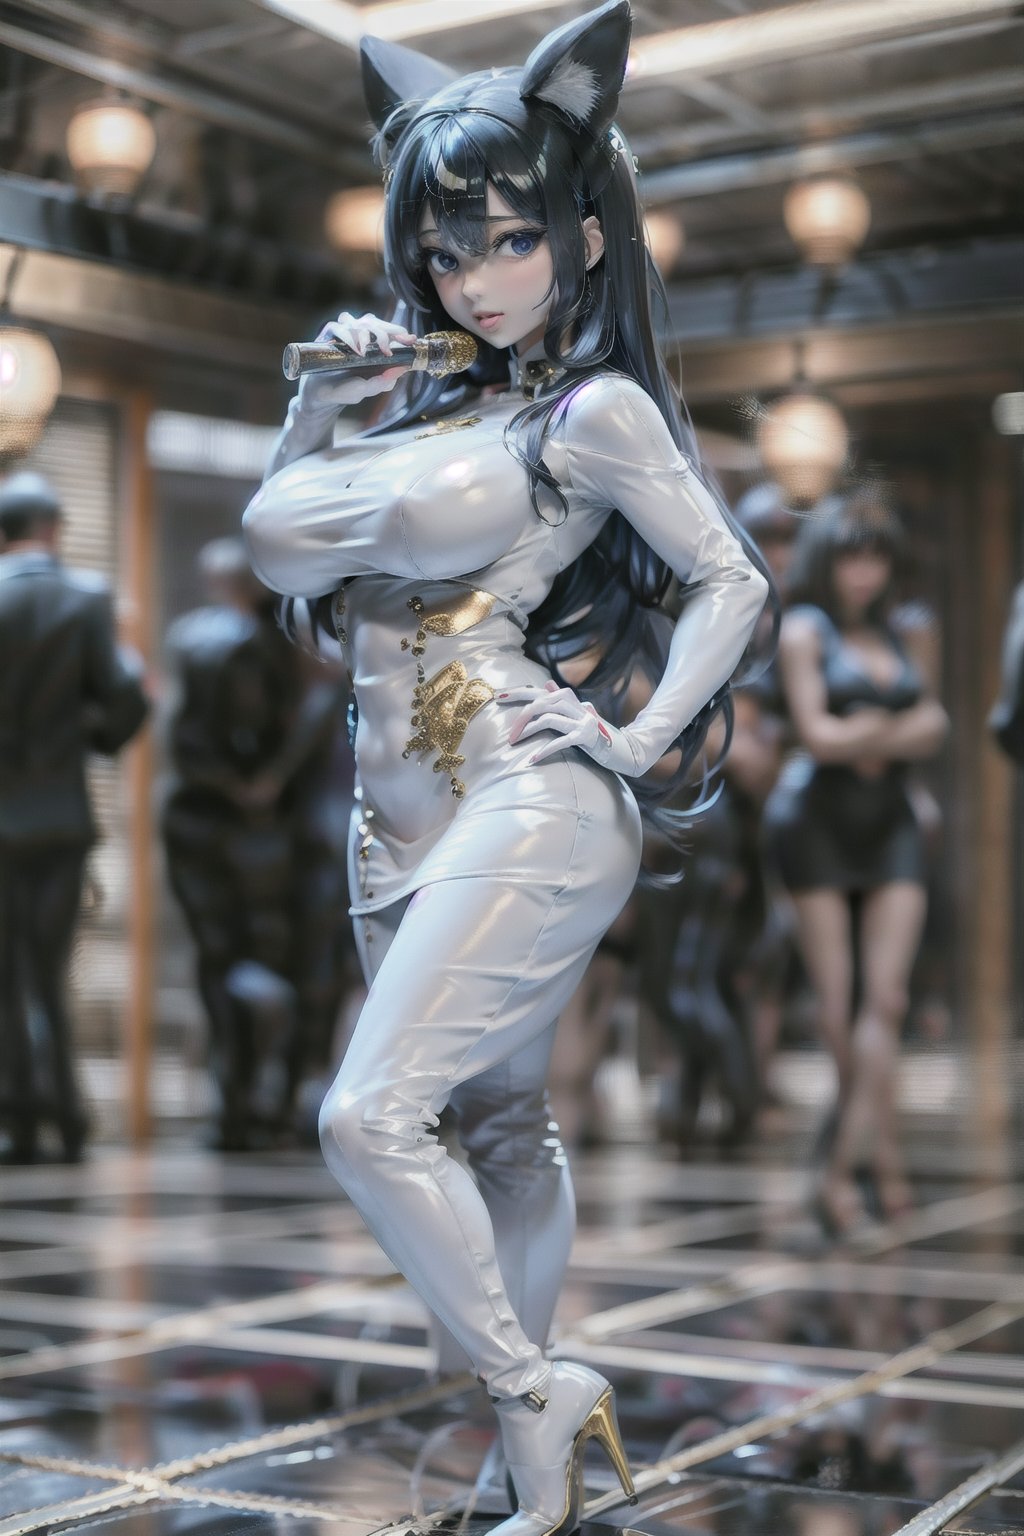 A sultry woman with a wolf ears and long and black hair with blue tips poses confidently in a vibrant gold latex Qipao dress, her full figure accentuated by the tight garment. She stands tall, her high heels clicking on the polished floor as she strikes a sassy pose, one hand resting on her hip and the other holding a champagne flute. The lighting is dramatic, with a bright spotlight highlighting her curves against a dark background.(sparkling coralbone)